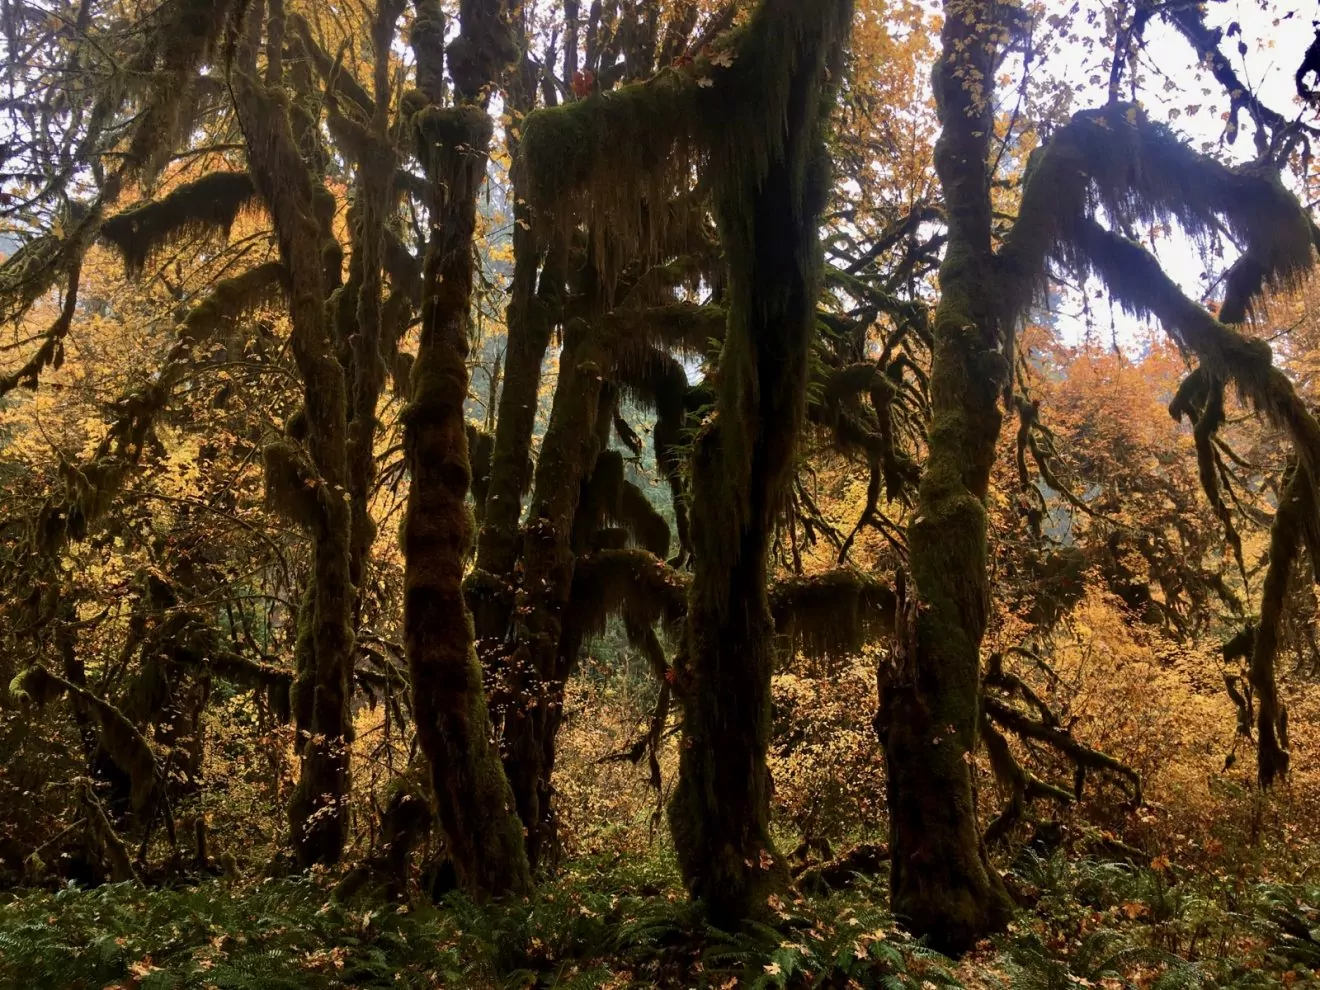 Hoh Rain Forest in October